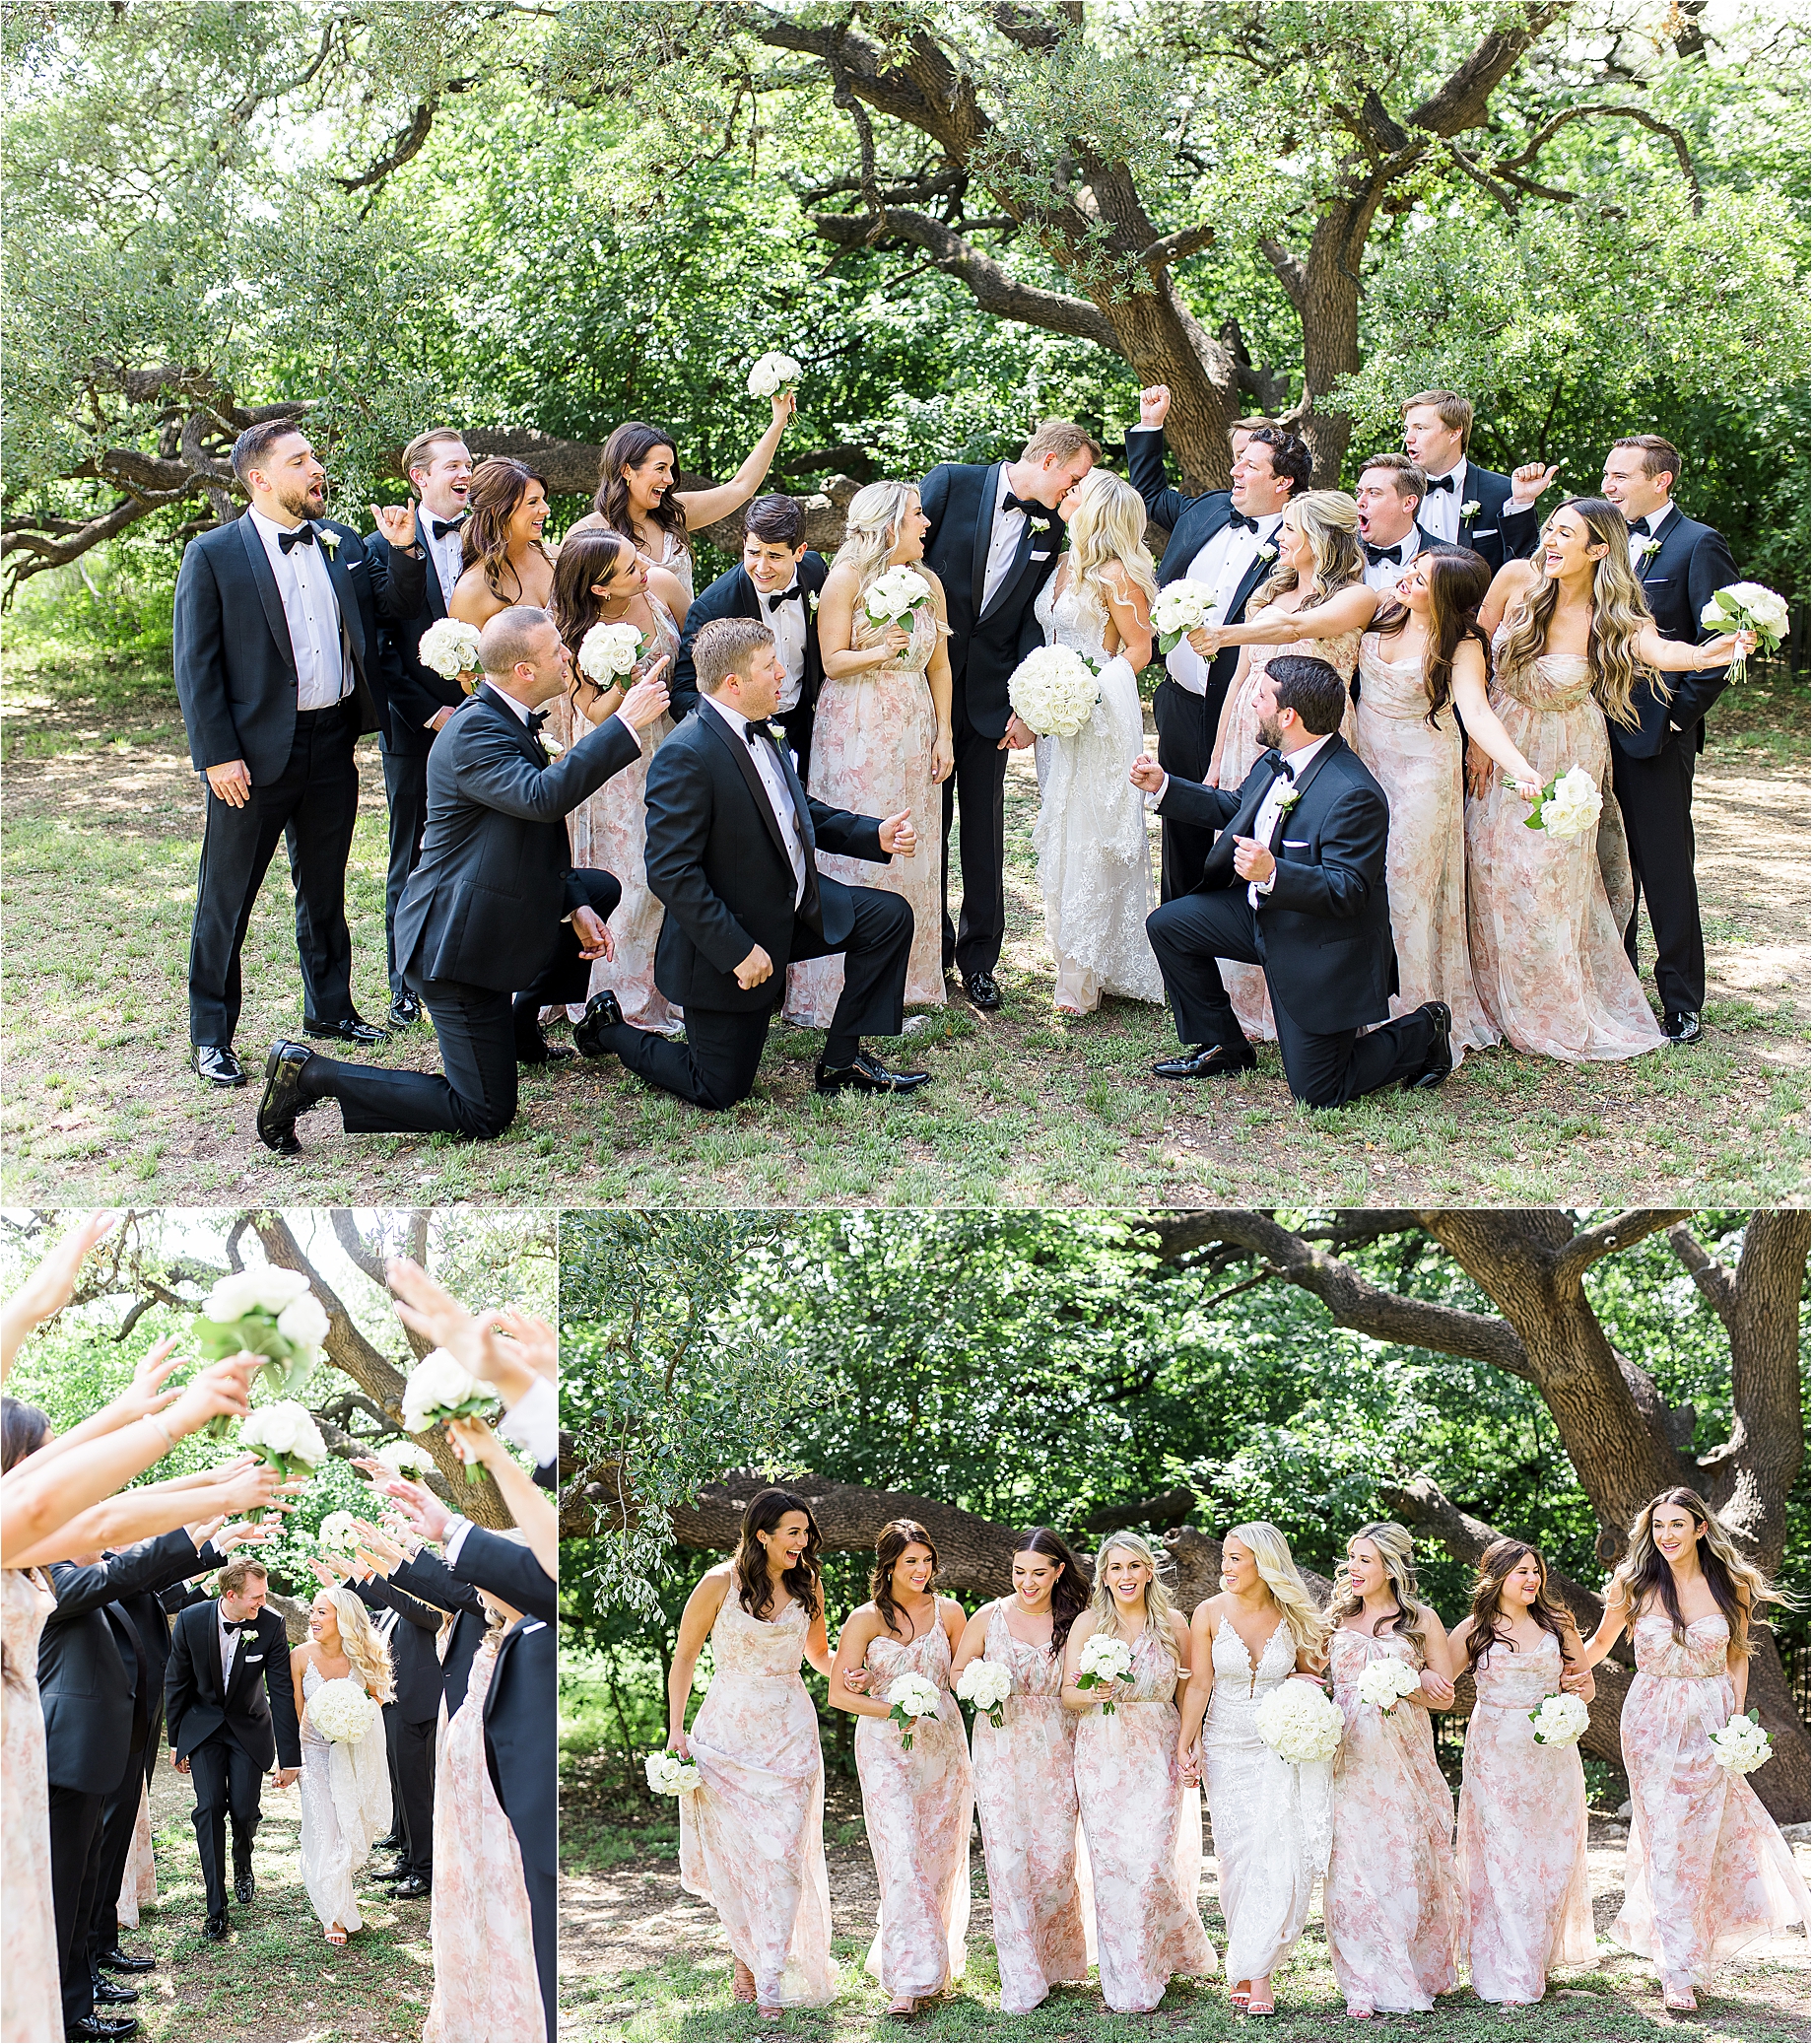 A bride and groom share a kiss surround by their wedding party in front of trees at Brodie Homestead in Austin, Texas.